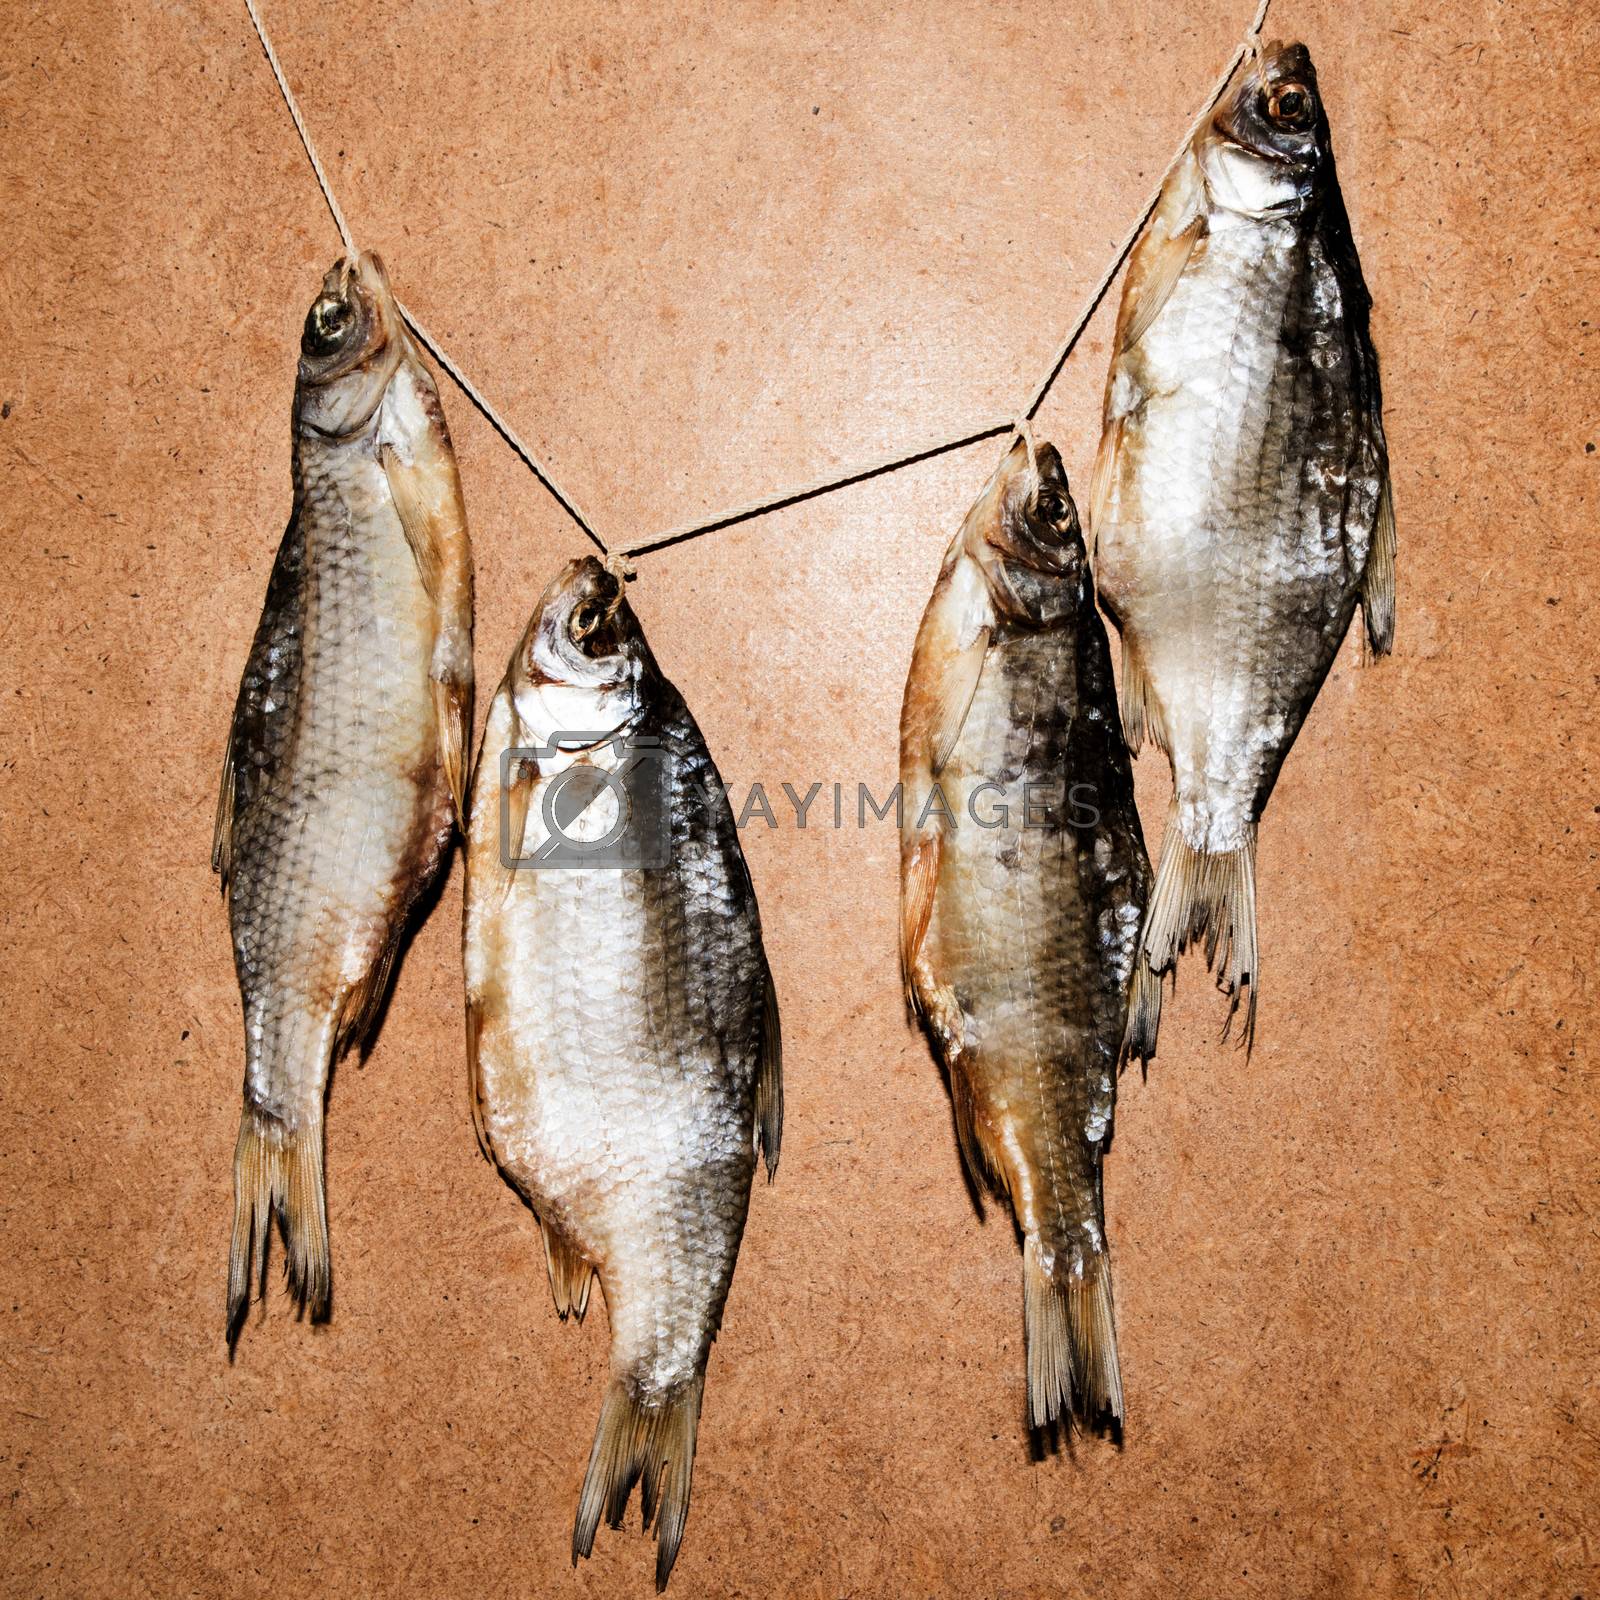 Royalty free image of Dry fish isolated on a wooden background by elina_chernikova